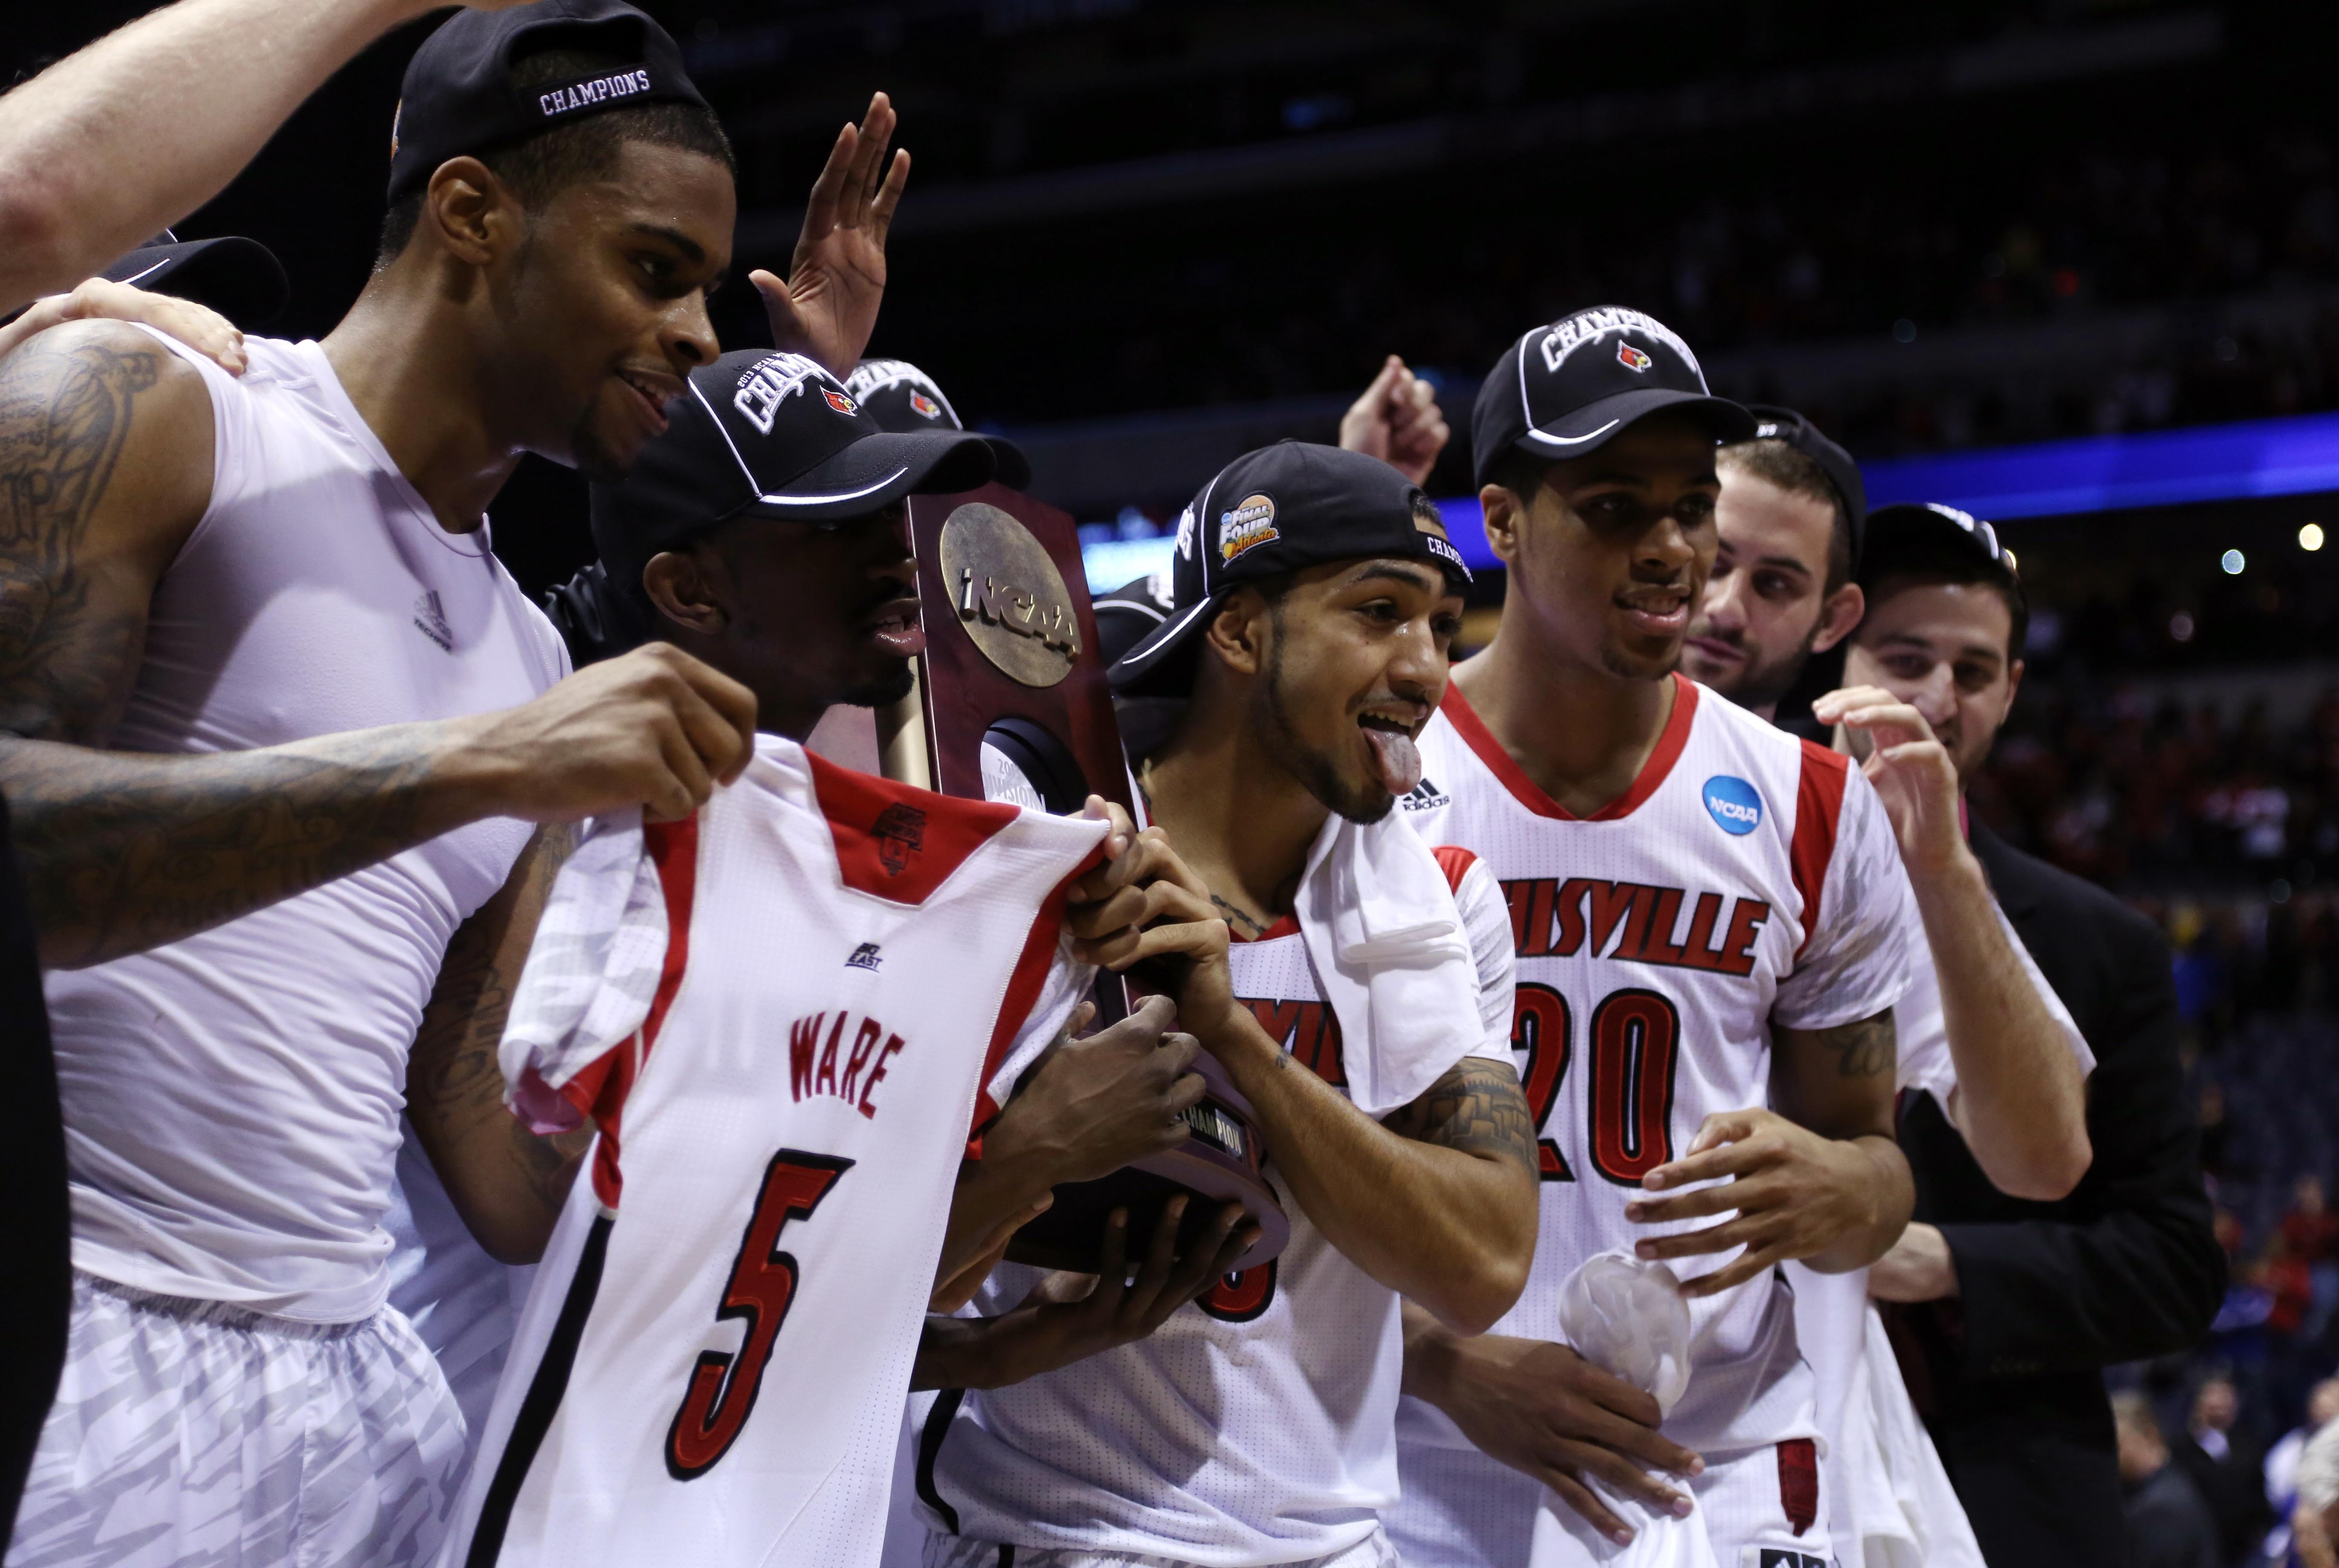 Louisville&#39;s Kevin Ware suffers gruesome leg injury, players emotional